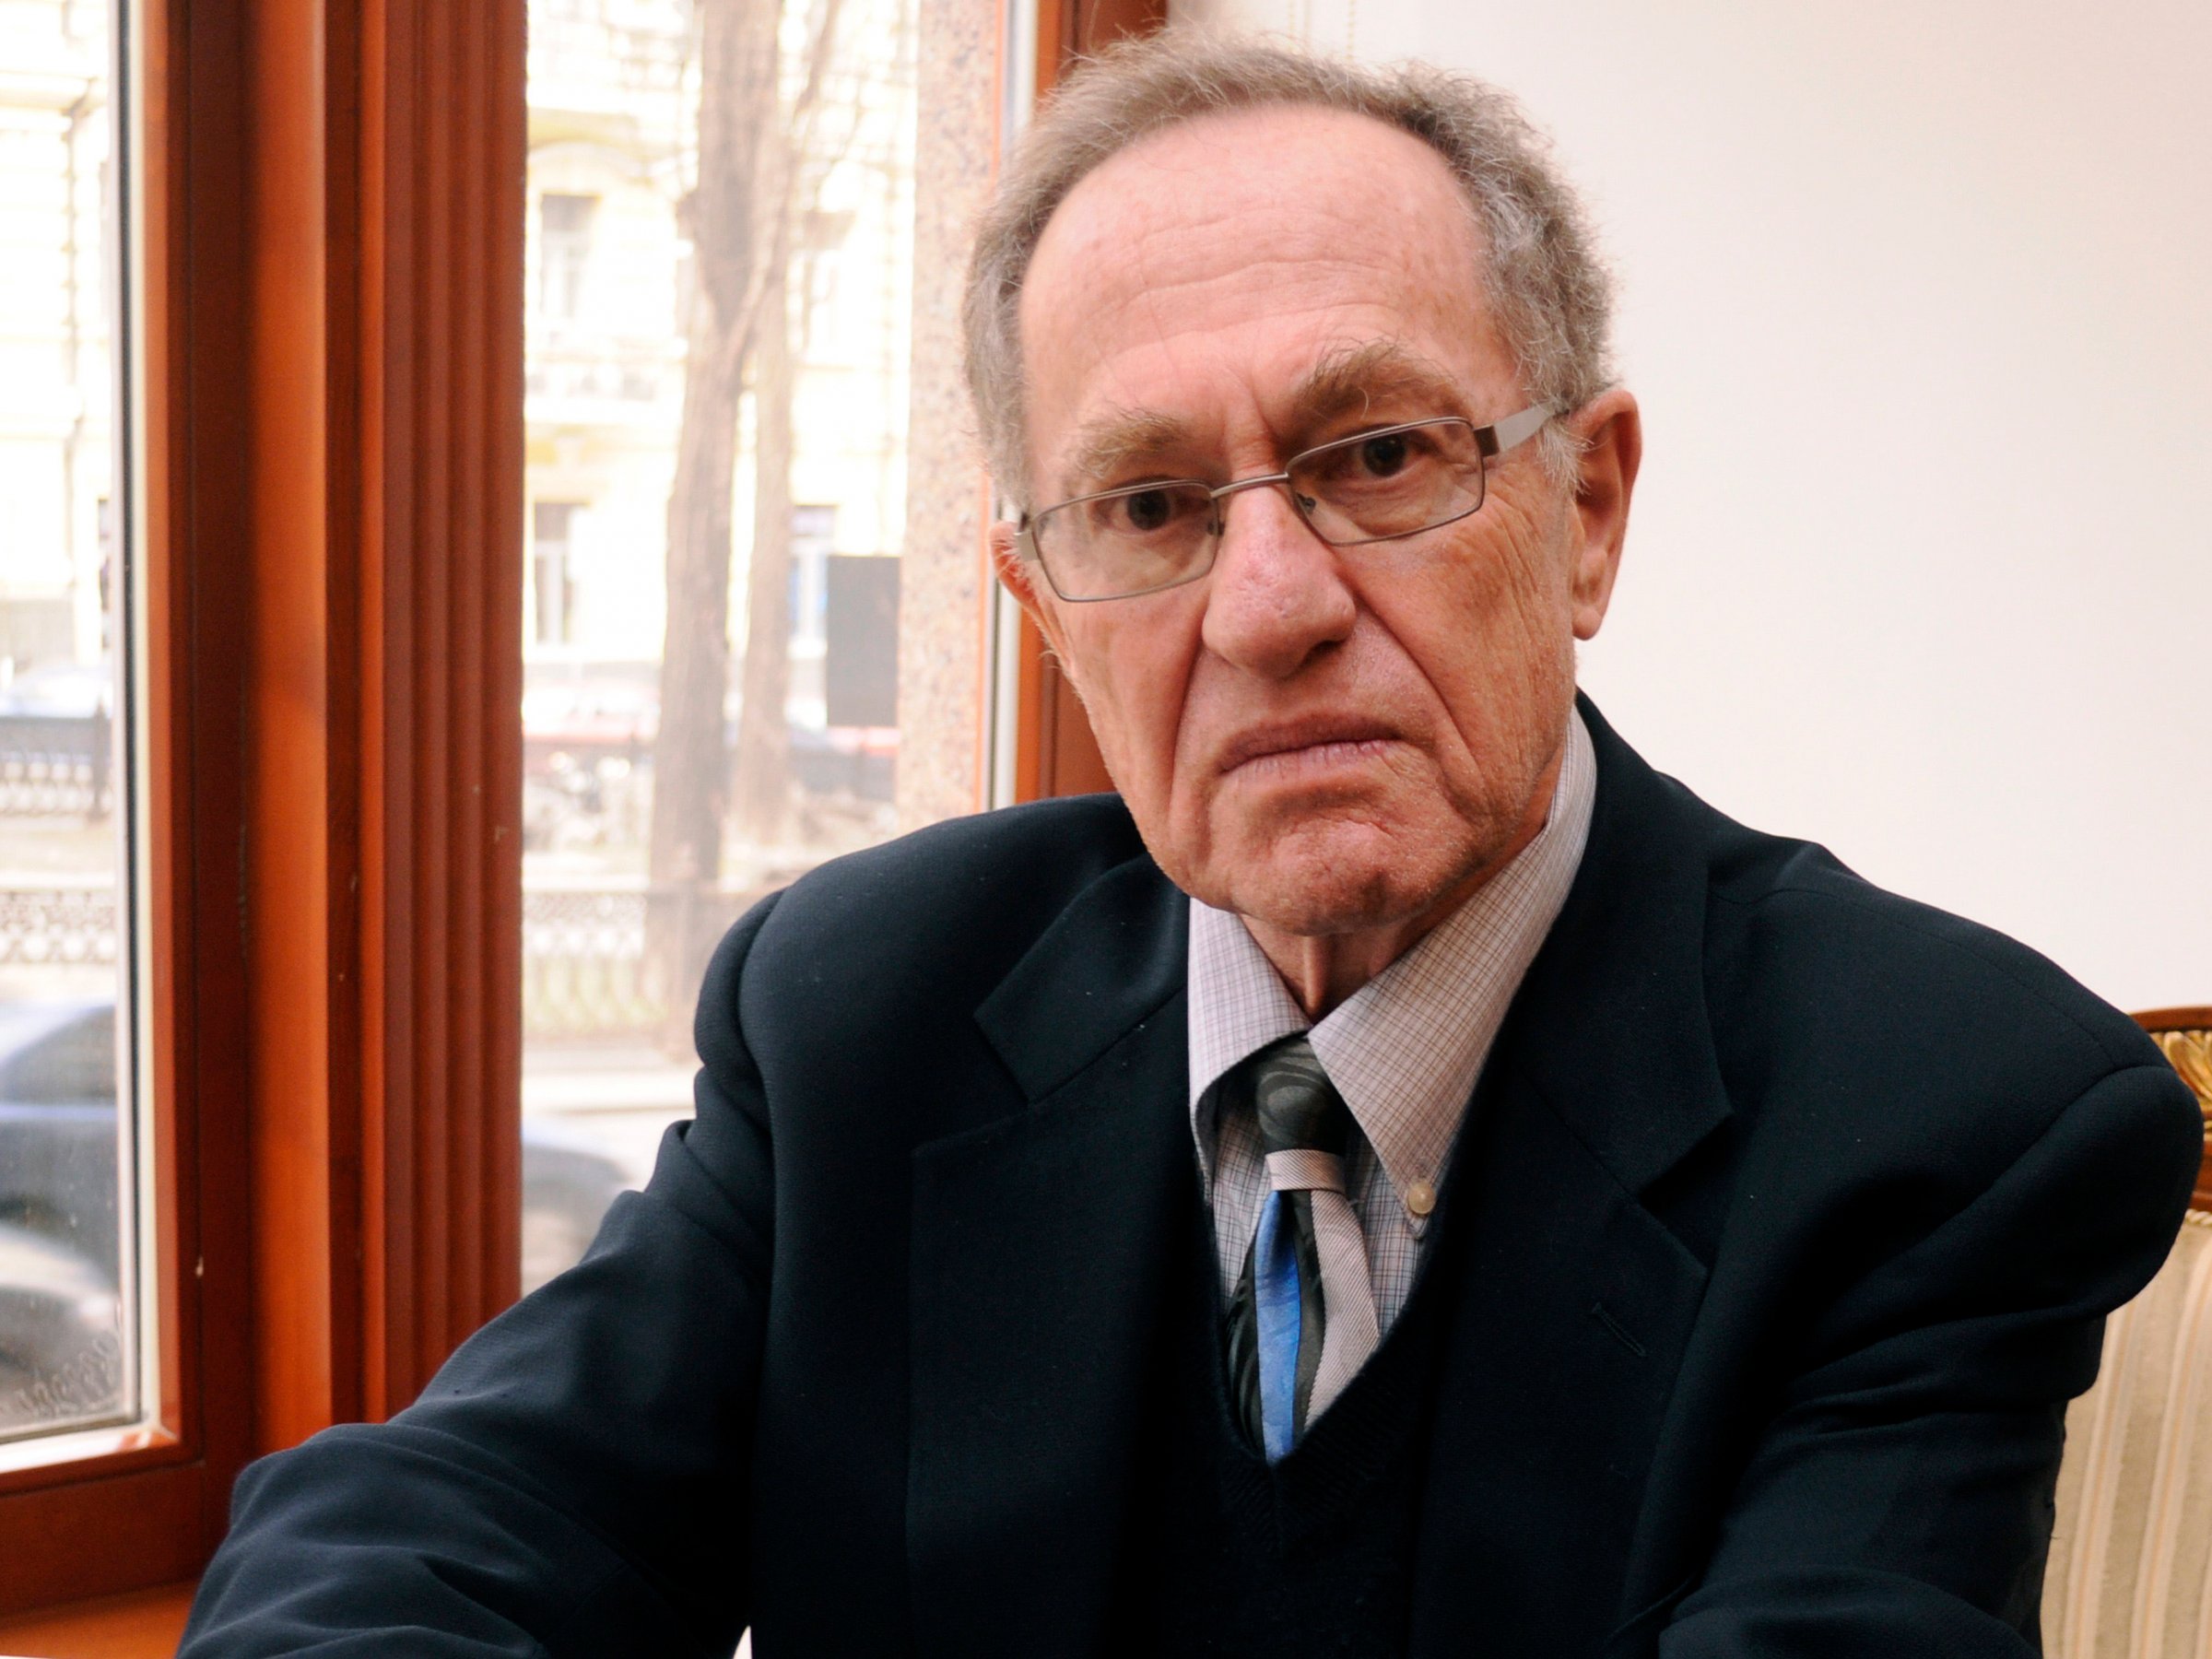 This April 11, 2011 file photo shows attorney Alan Dershowitz at a hotel in Kiev, Ukraine, where he was preparing to defend former Ukrainian president Leonid Kuchma, who was accused in the murder of an investigative journalist more than 10 years ago. The papers of the prominent lawyer and author are now available to researchers at Dershowitz's alma mater, Brooklyn College. Dershowitz donated his papers to Brooklyn College rather than Harvard, where he is a professor. (AP Photo/Sergei Chuzavkov, File)